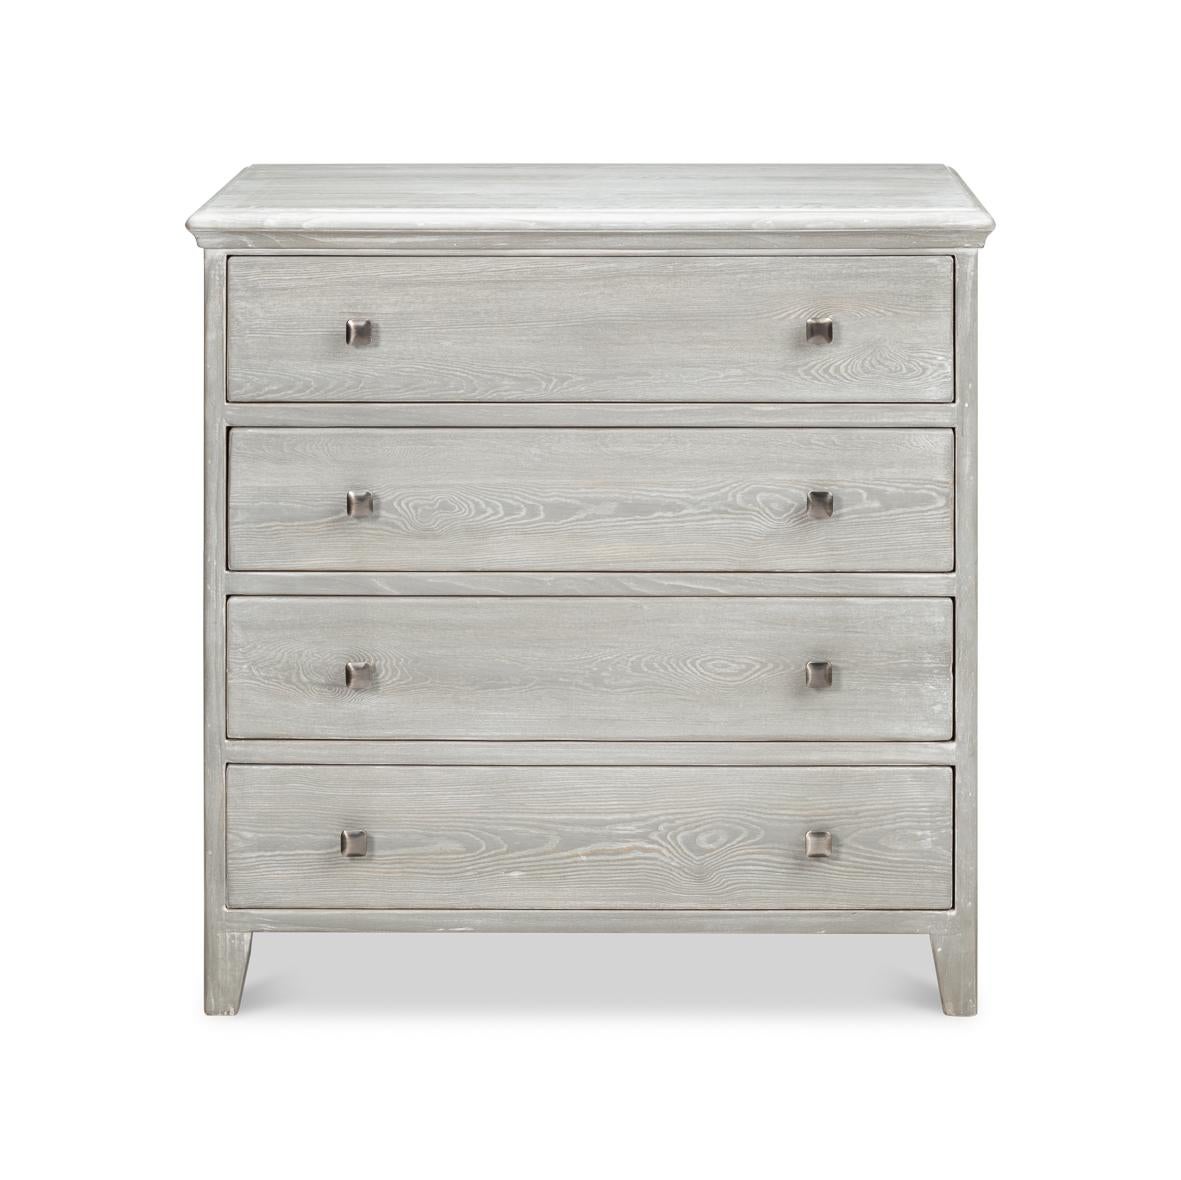 Strong, stately, and in the Grey Moonskin finish, the chest takes on a classic antique feeling. Perfectly sized for multiple applications in any home, use it as a pair in any room for extra storage. It features clean lines, four drawers, a unique